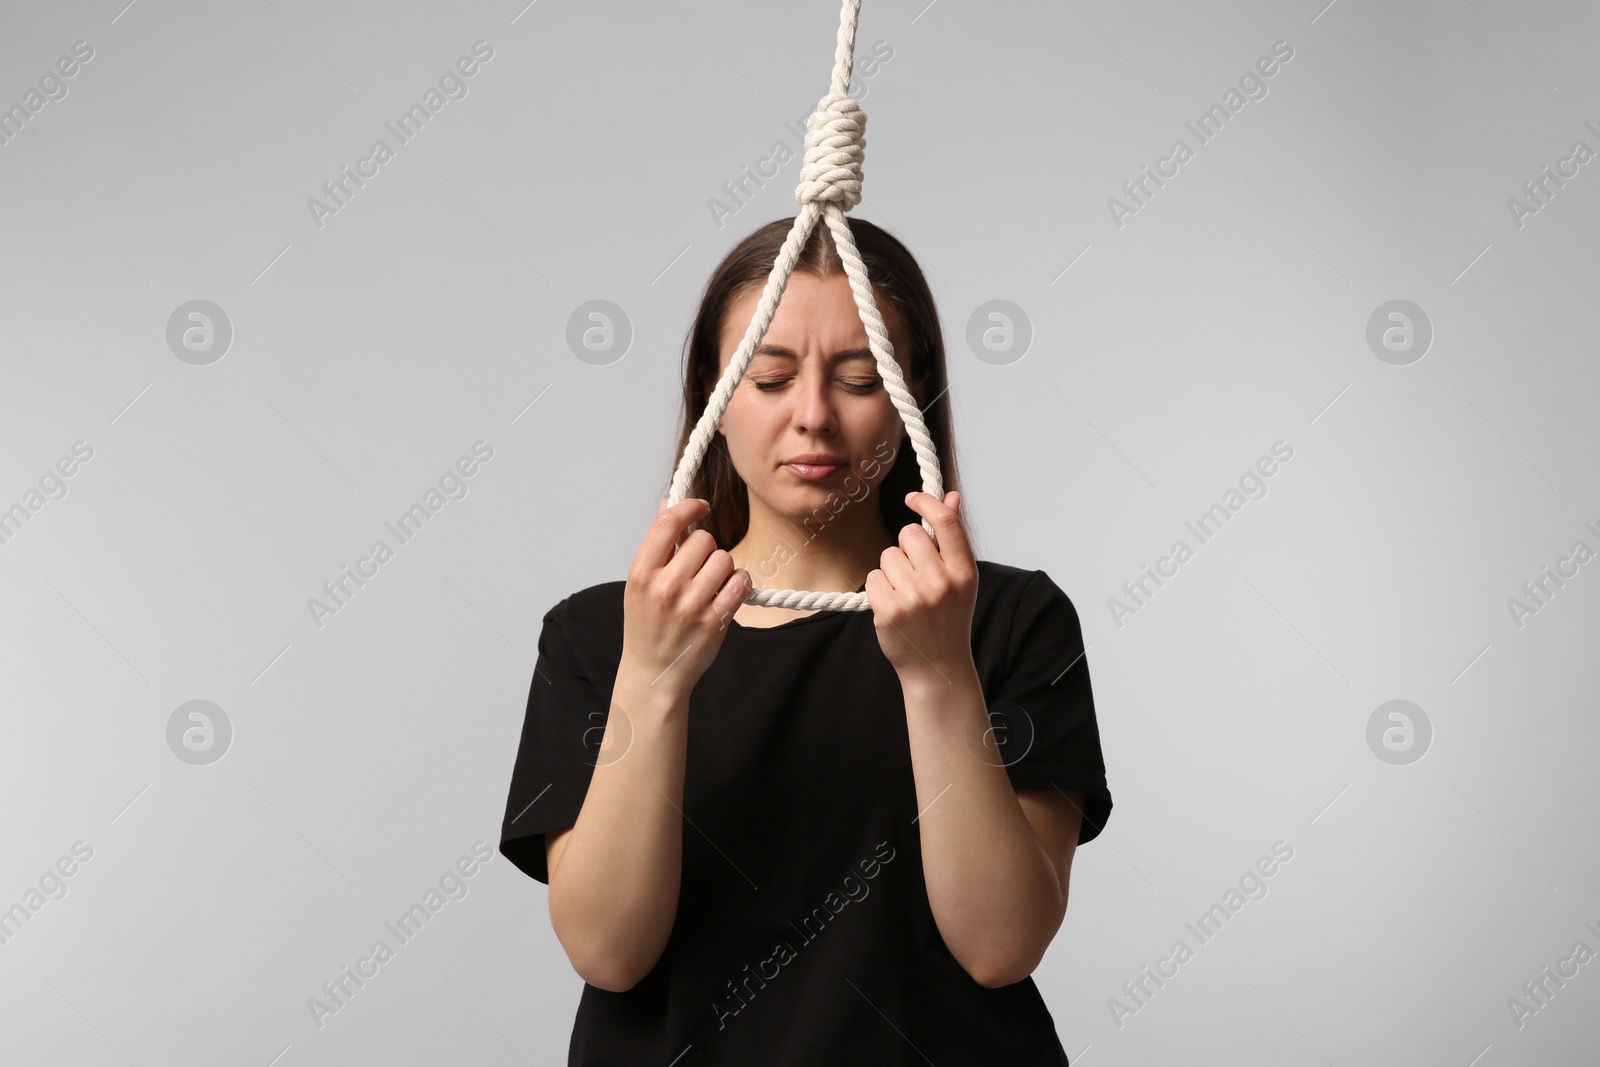 Photo of Depressed woman with rope noose on light grey background